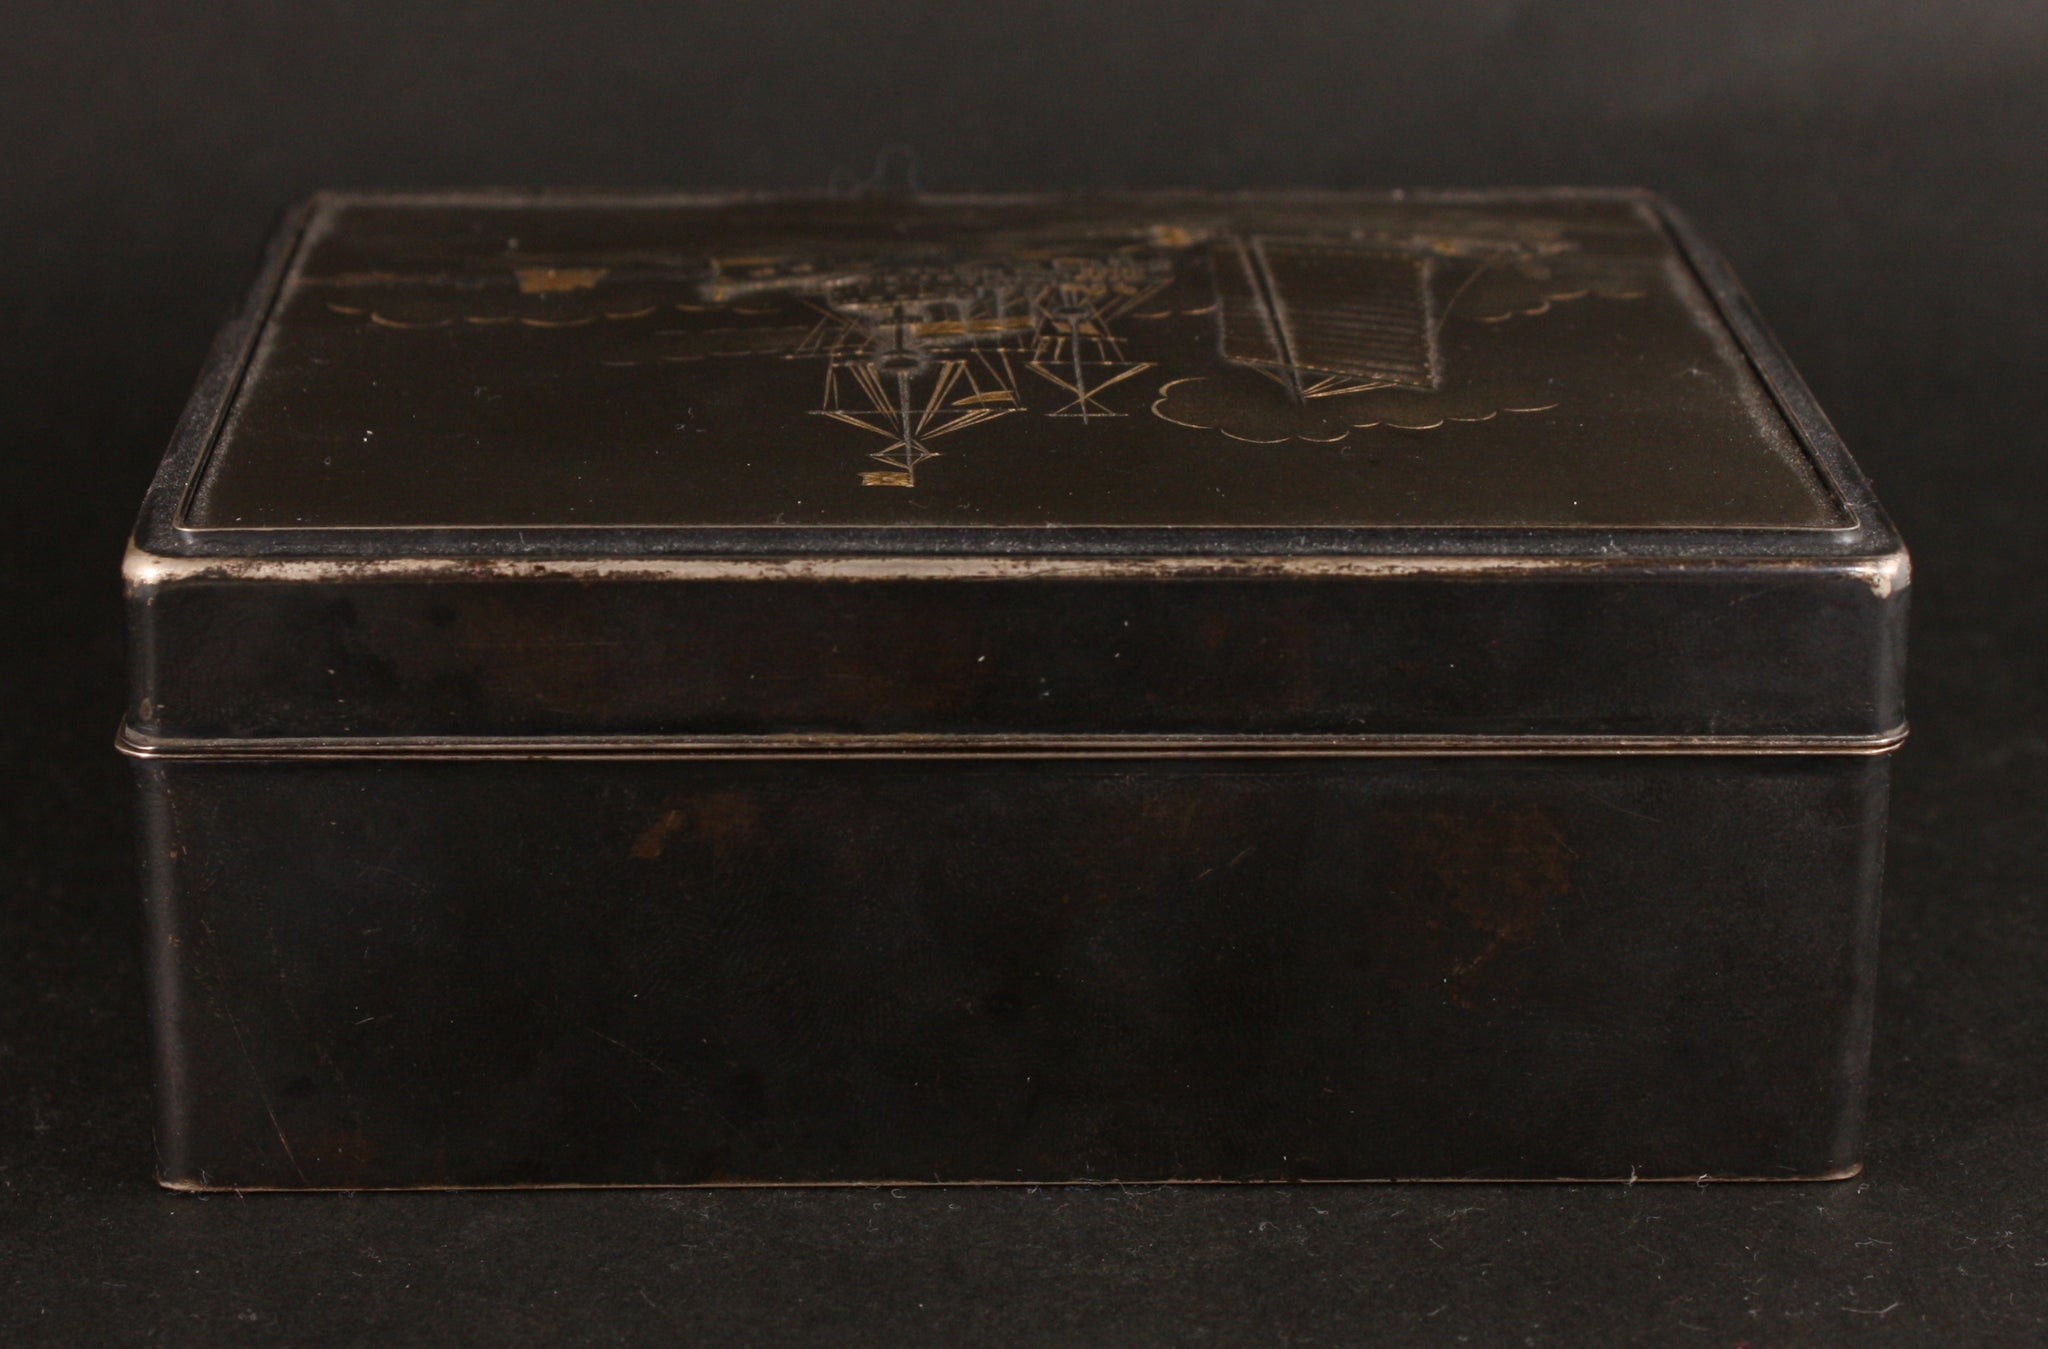 Incredibly Detailed Antique Japanese 1931 Cruiser Izumo Silver-lined Navy Lacquer Box